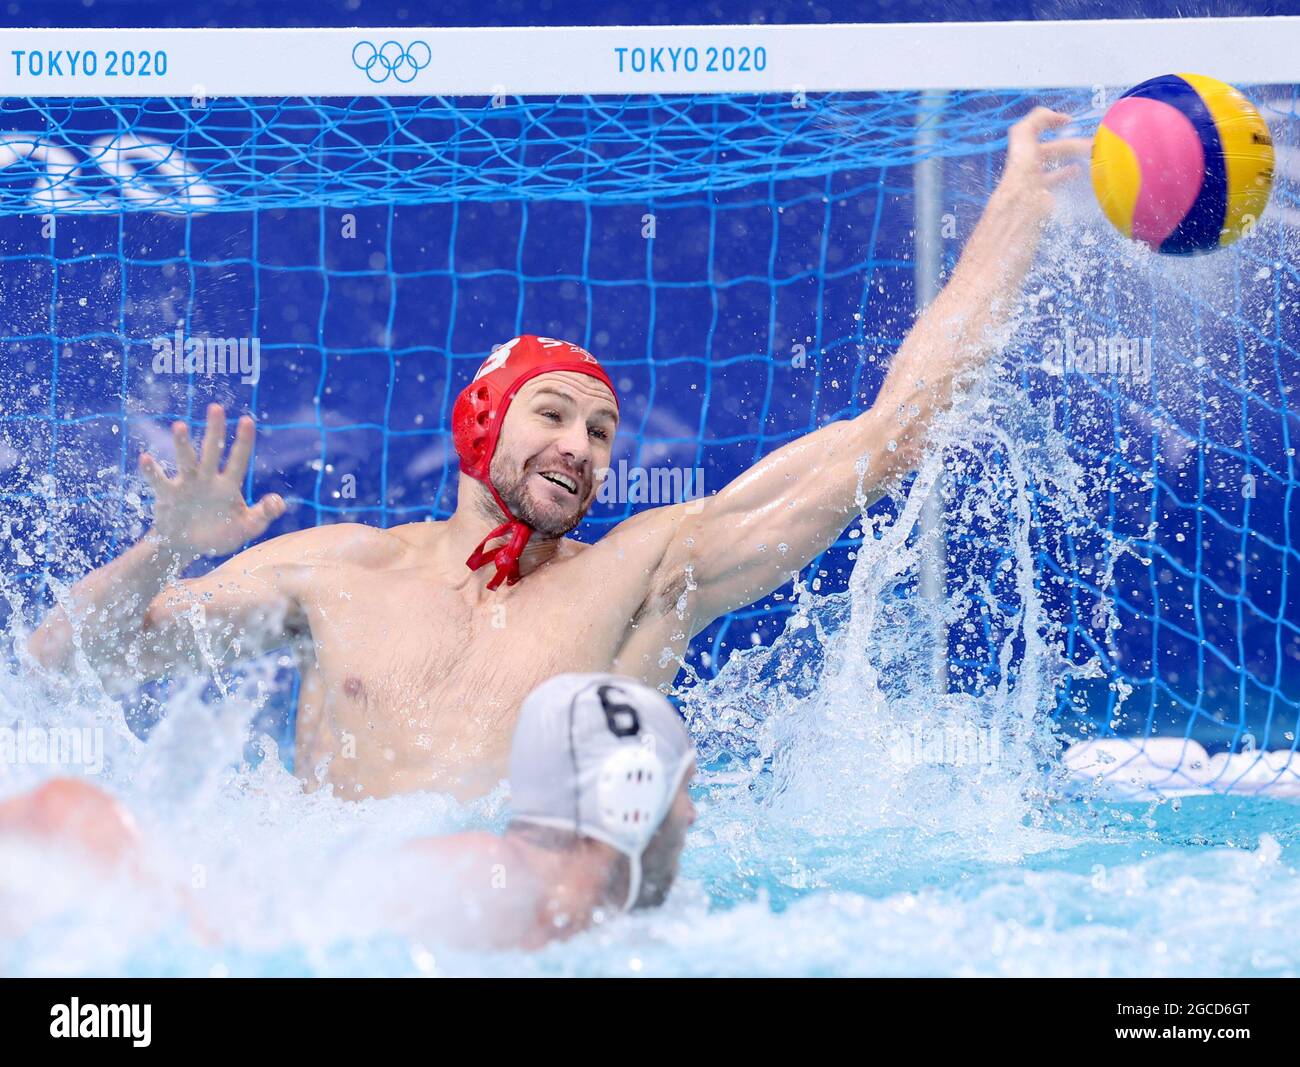 Tokyo, Japan. 8th Aug, 2021. Goalkeeper of Team Serbia Branislav Mitrovic competes during the men's water polo final at Tokyo 2020 Olympic Games, in Tokyo, Japan, Aug. 8, 2021. Credit: Chen Jianli/Xinhua/Alamy Live News Stock Photo